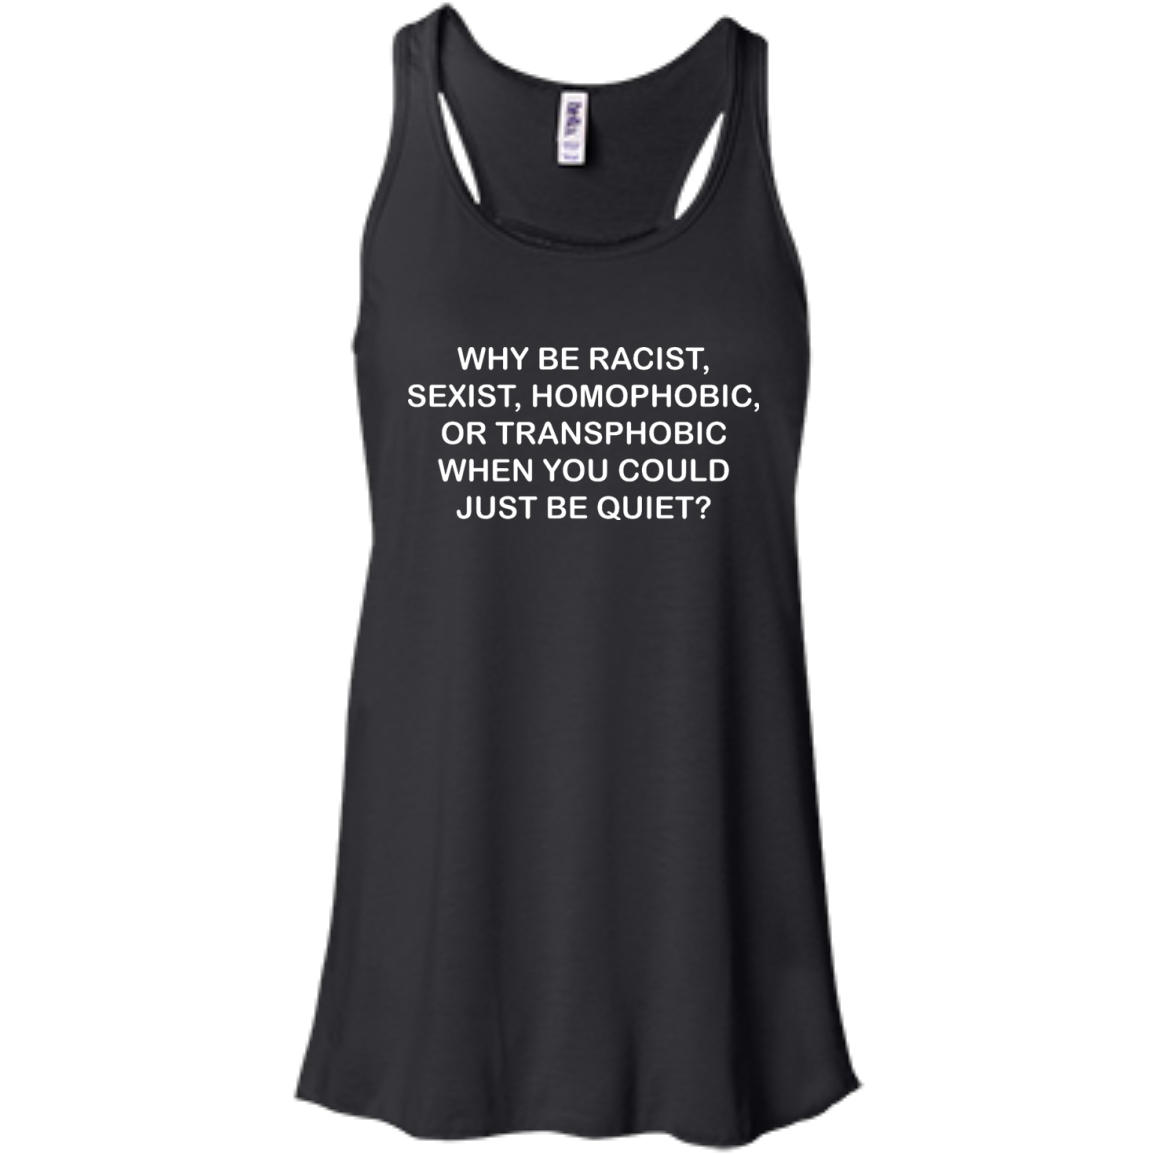 Why be racist, sexist, homophobic or transphobic shirt